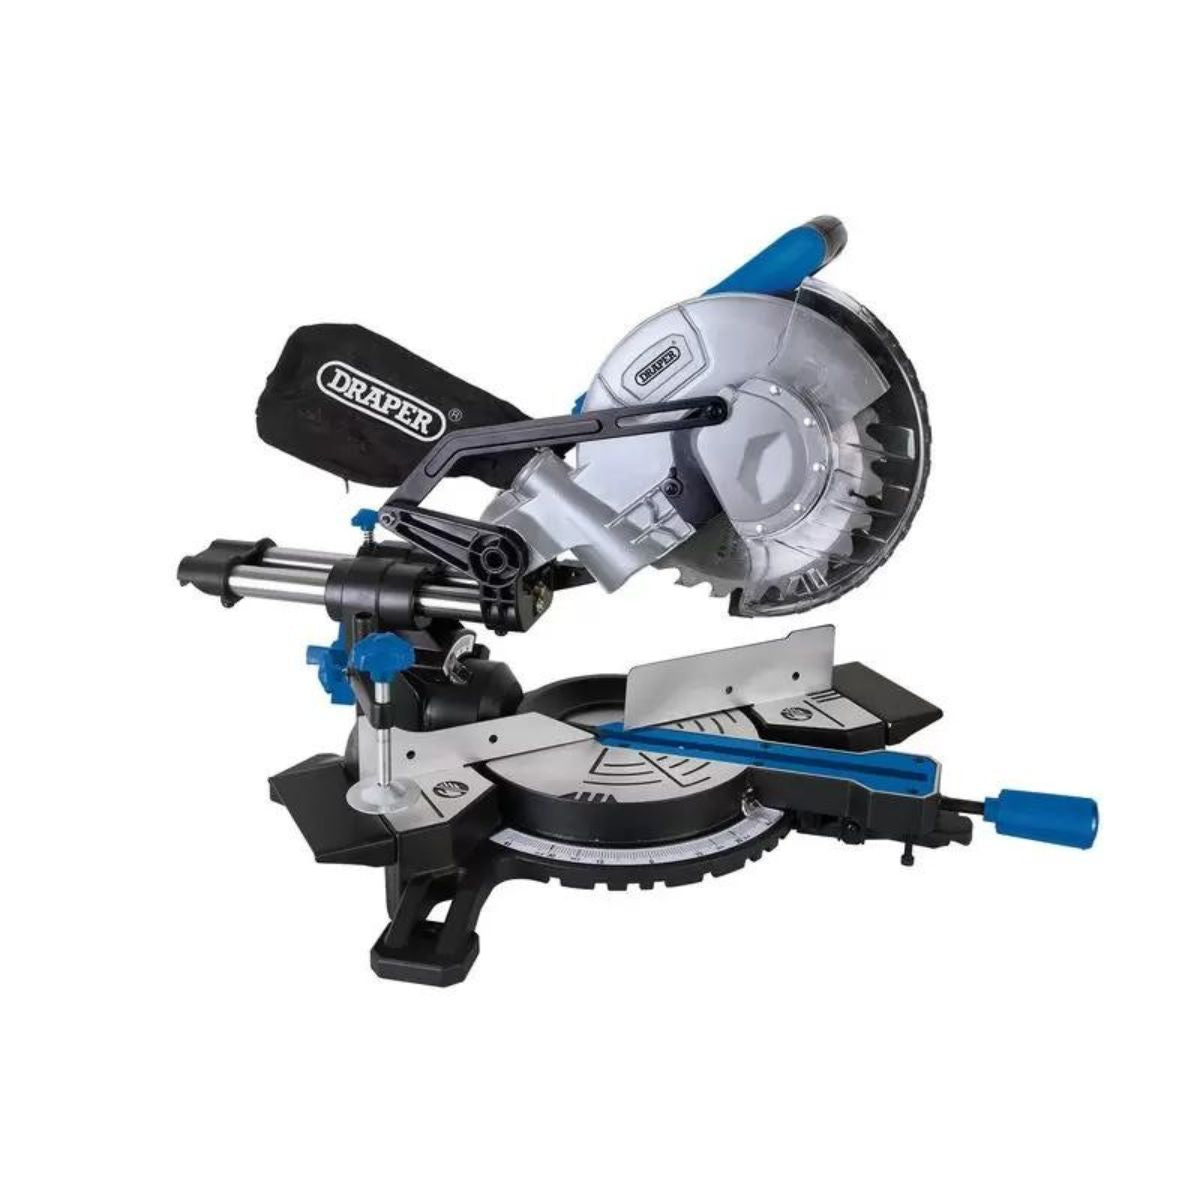 Draper SMS210B Sliding Compound Mitre Saw with Laser Cutting Guide 210mm 230V/1500W 83677